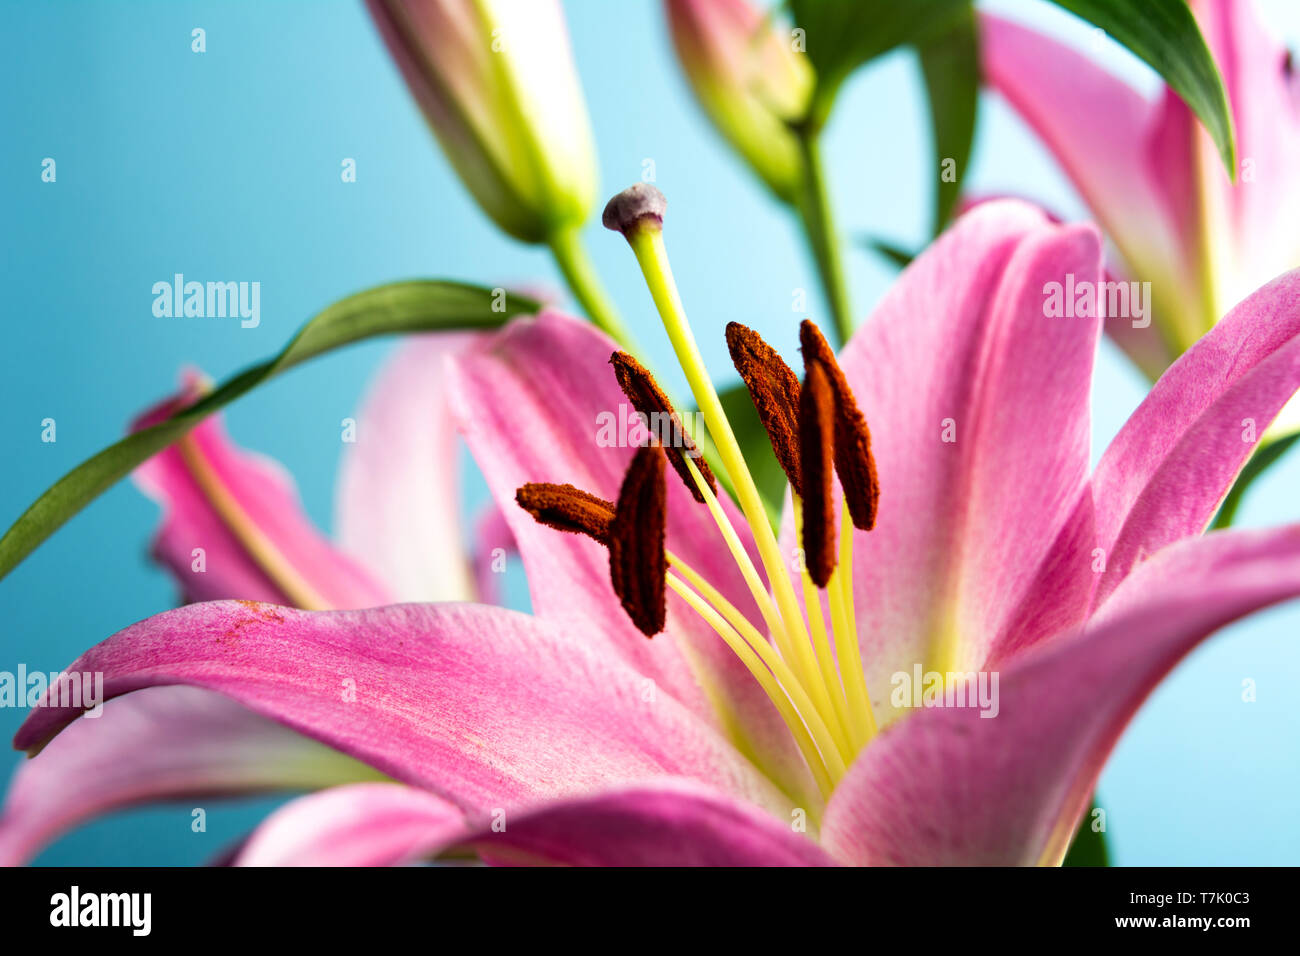 Beautiful Lily flowers on blue background with copy space Stock Photo